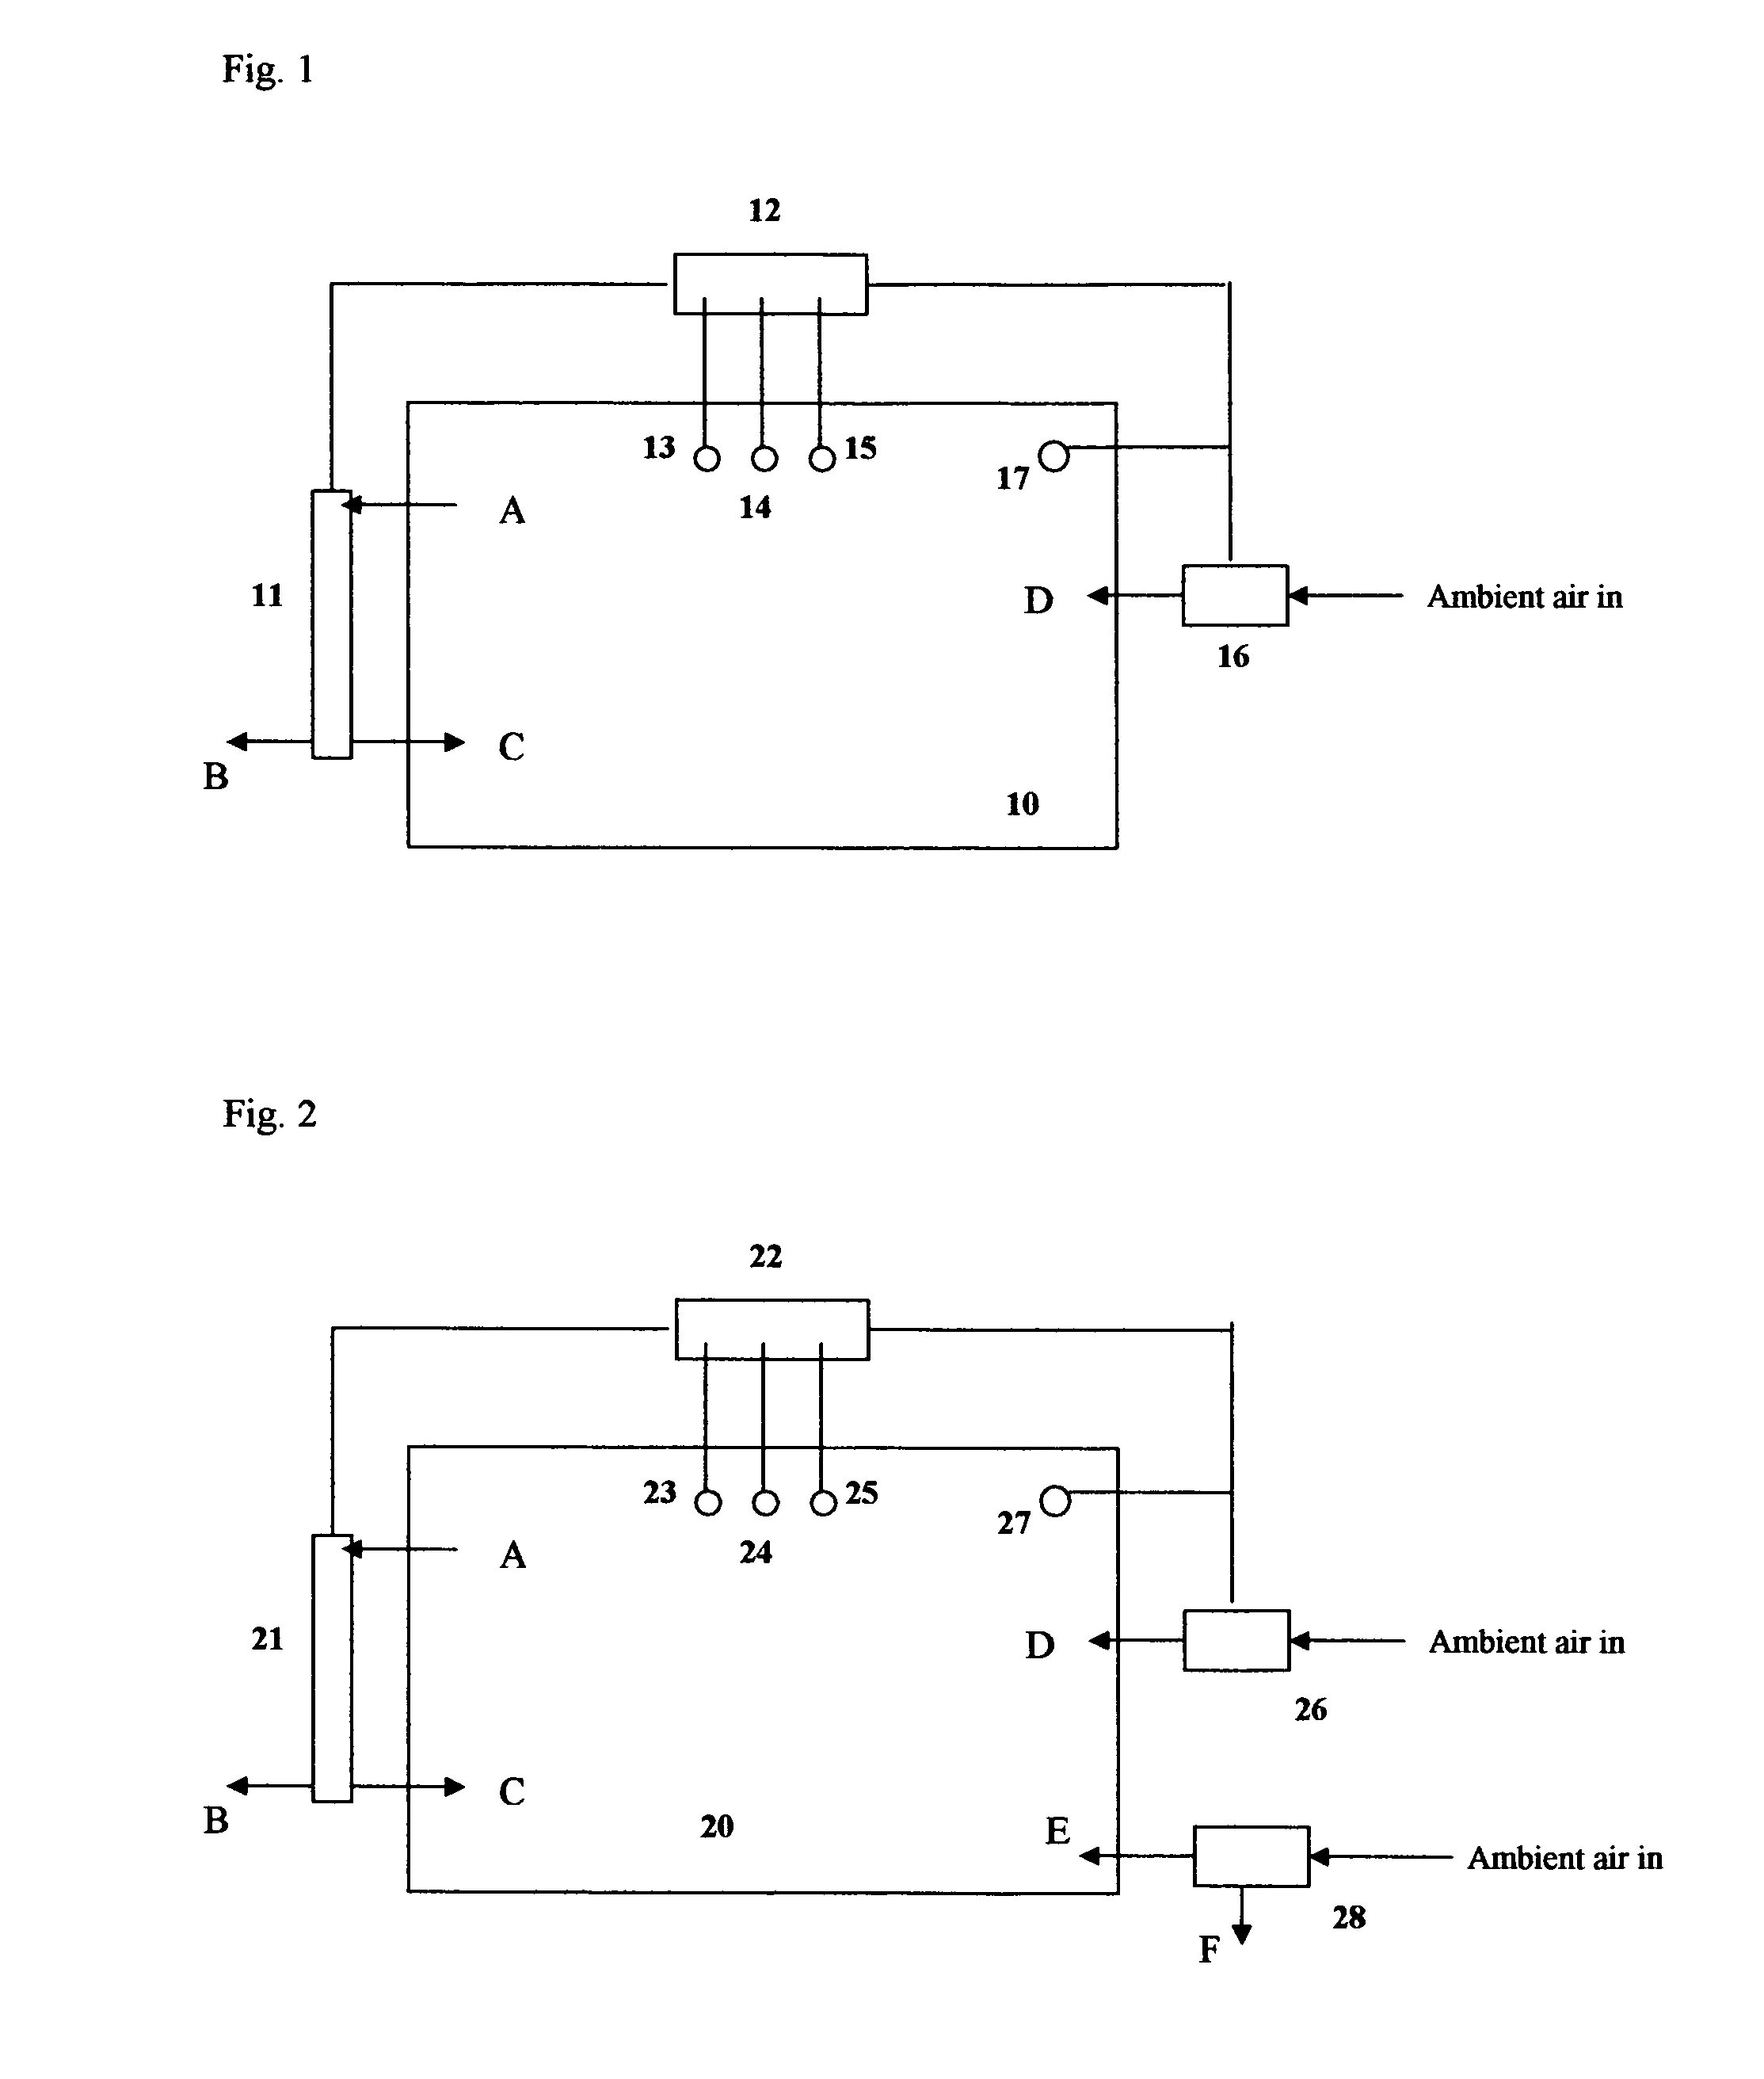 Method of producing hypoxic environments in occupied compartments with simultaneous removal of excessive carbon dioxide and humidity